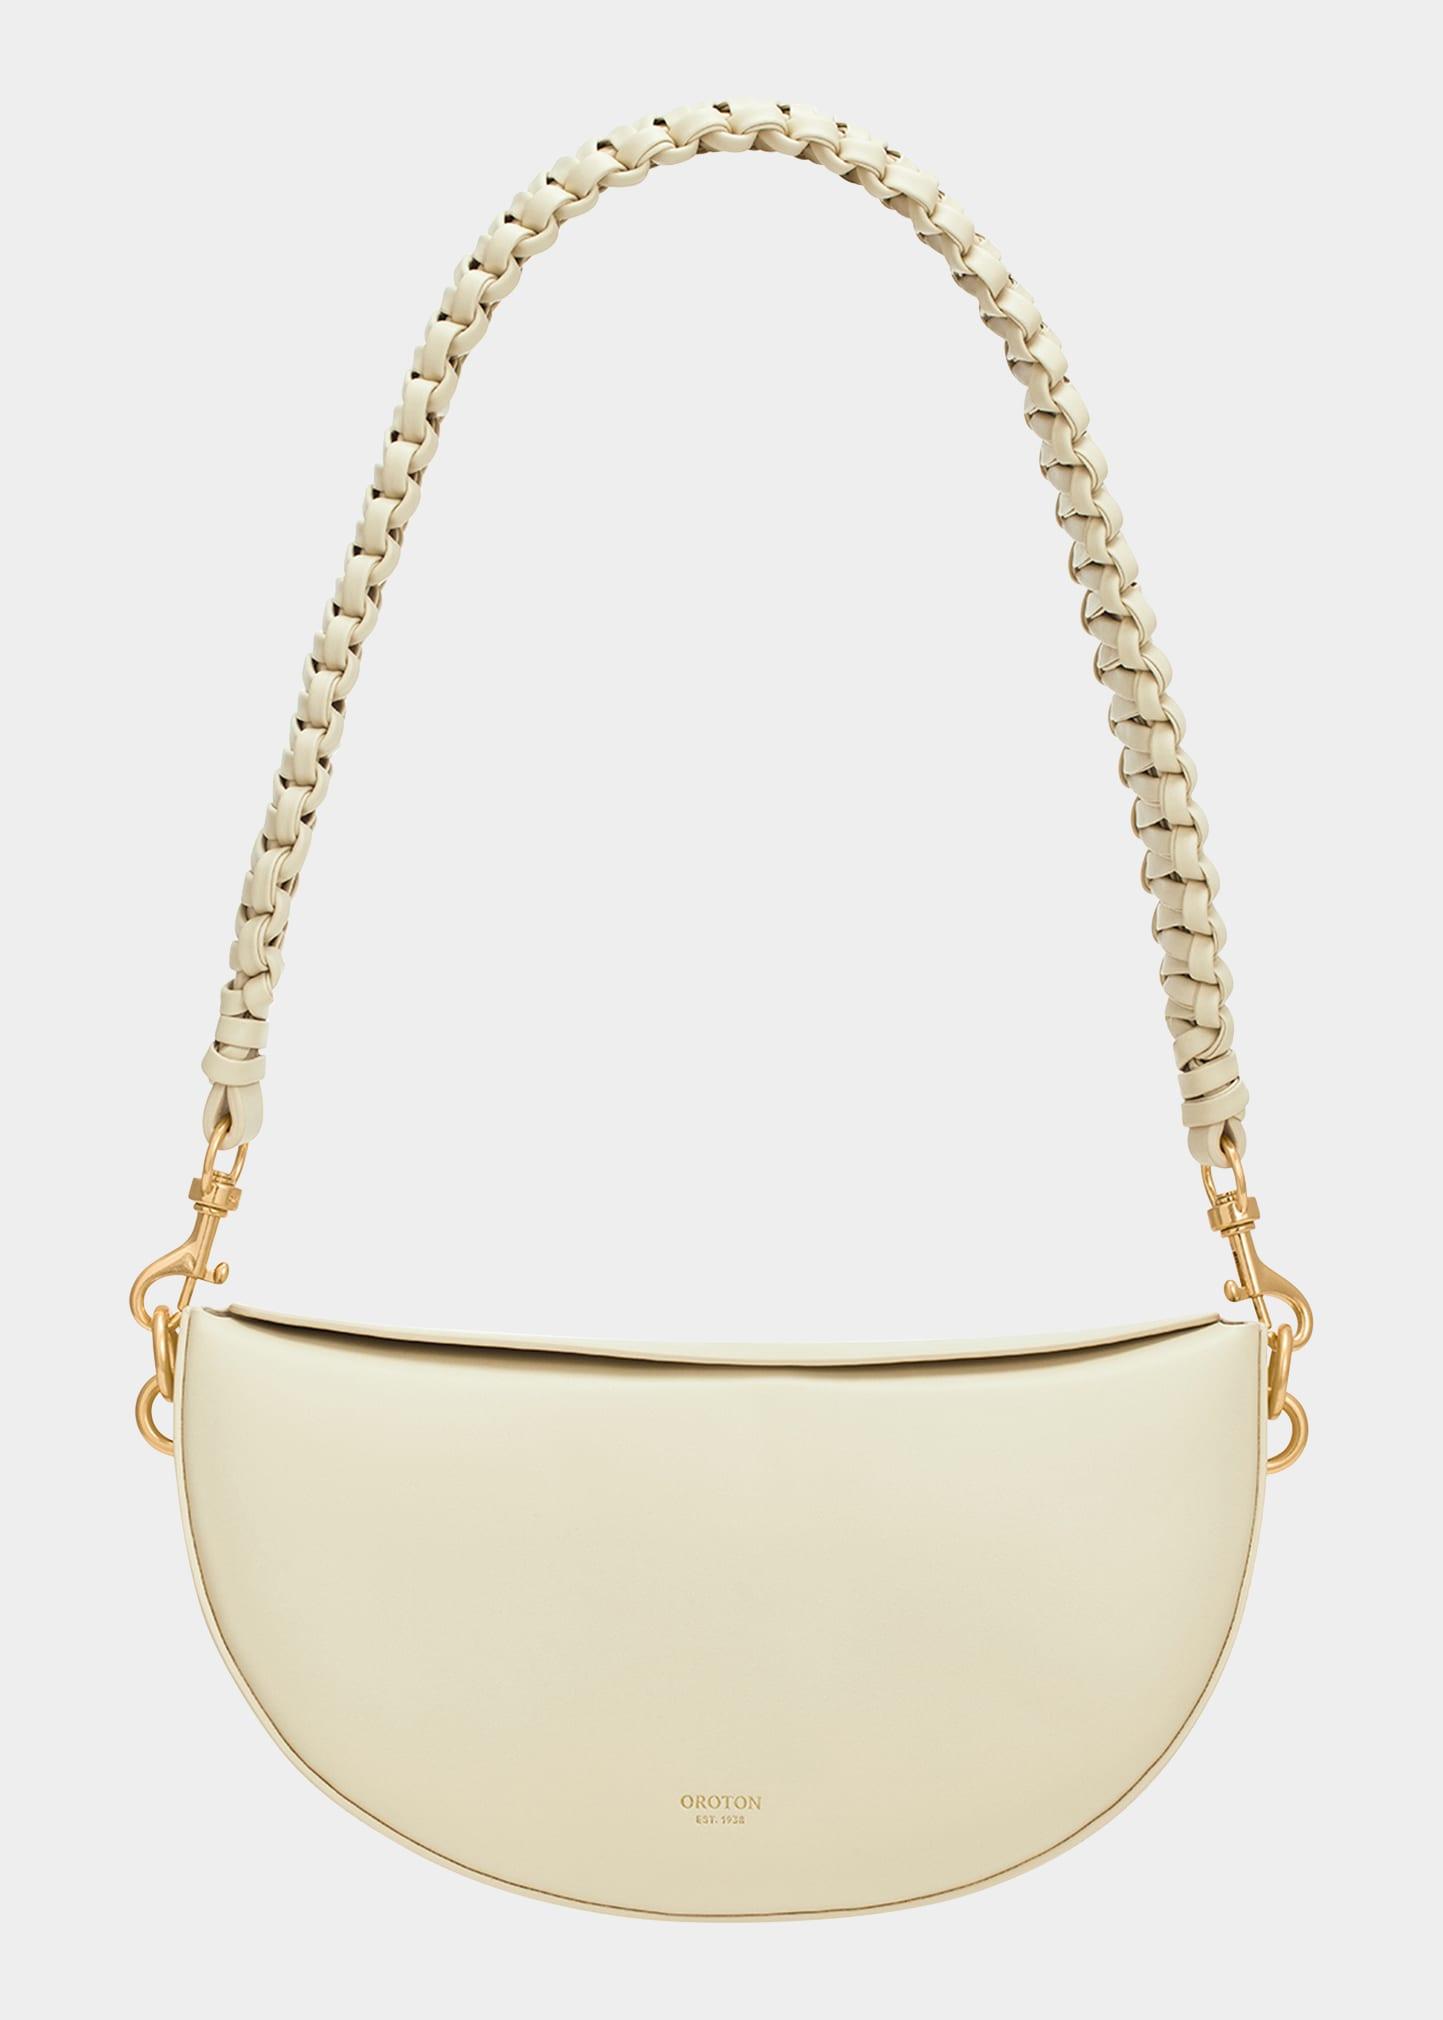 Oroton Brie Braided Leather Shoulder Bag in Natural | Lyst